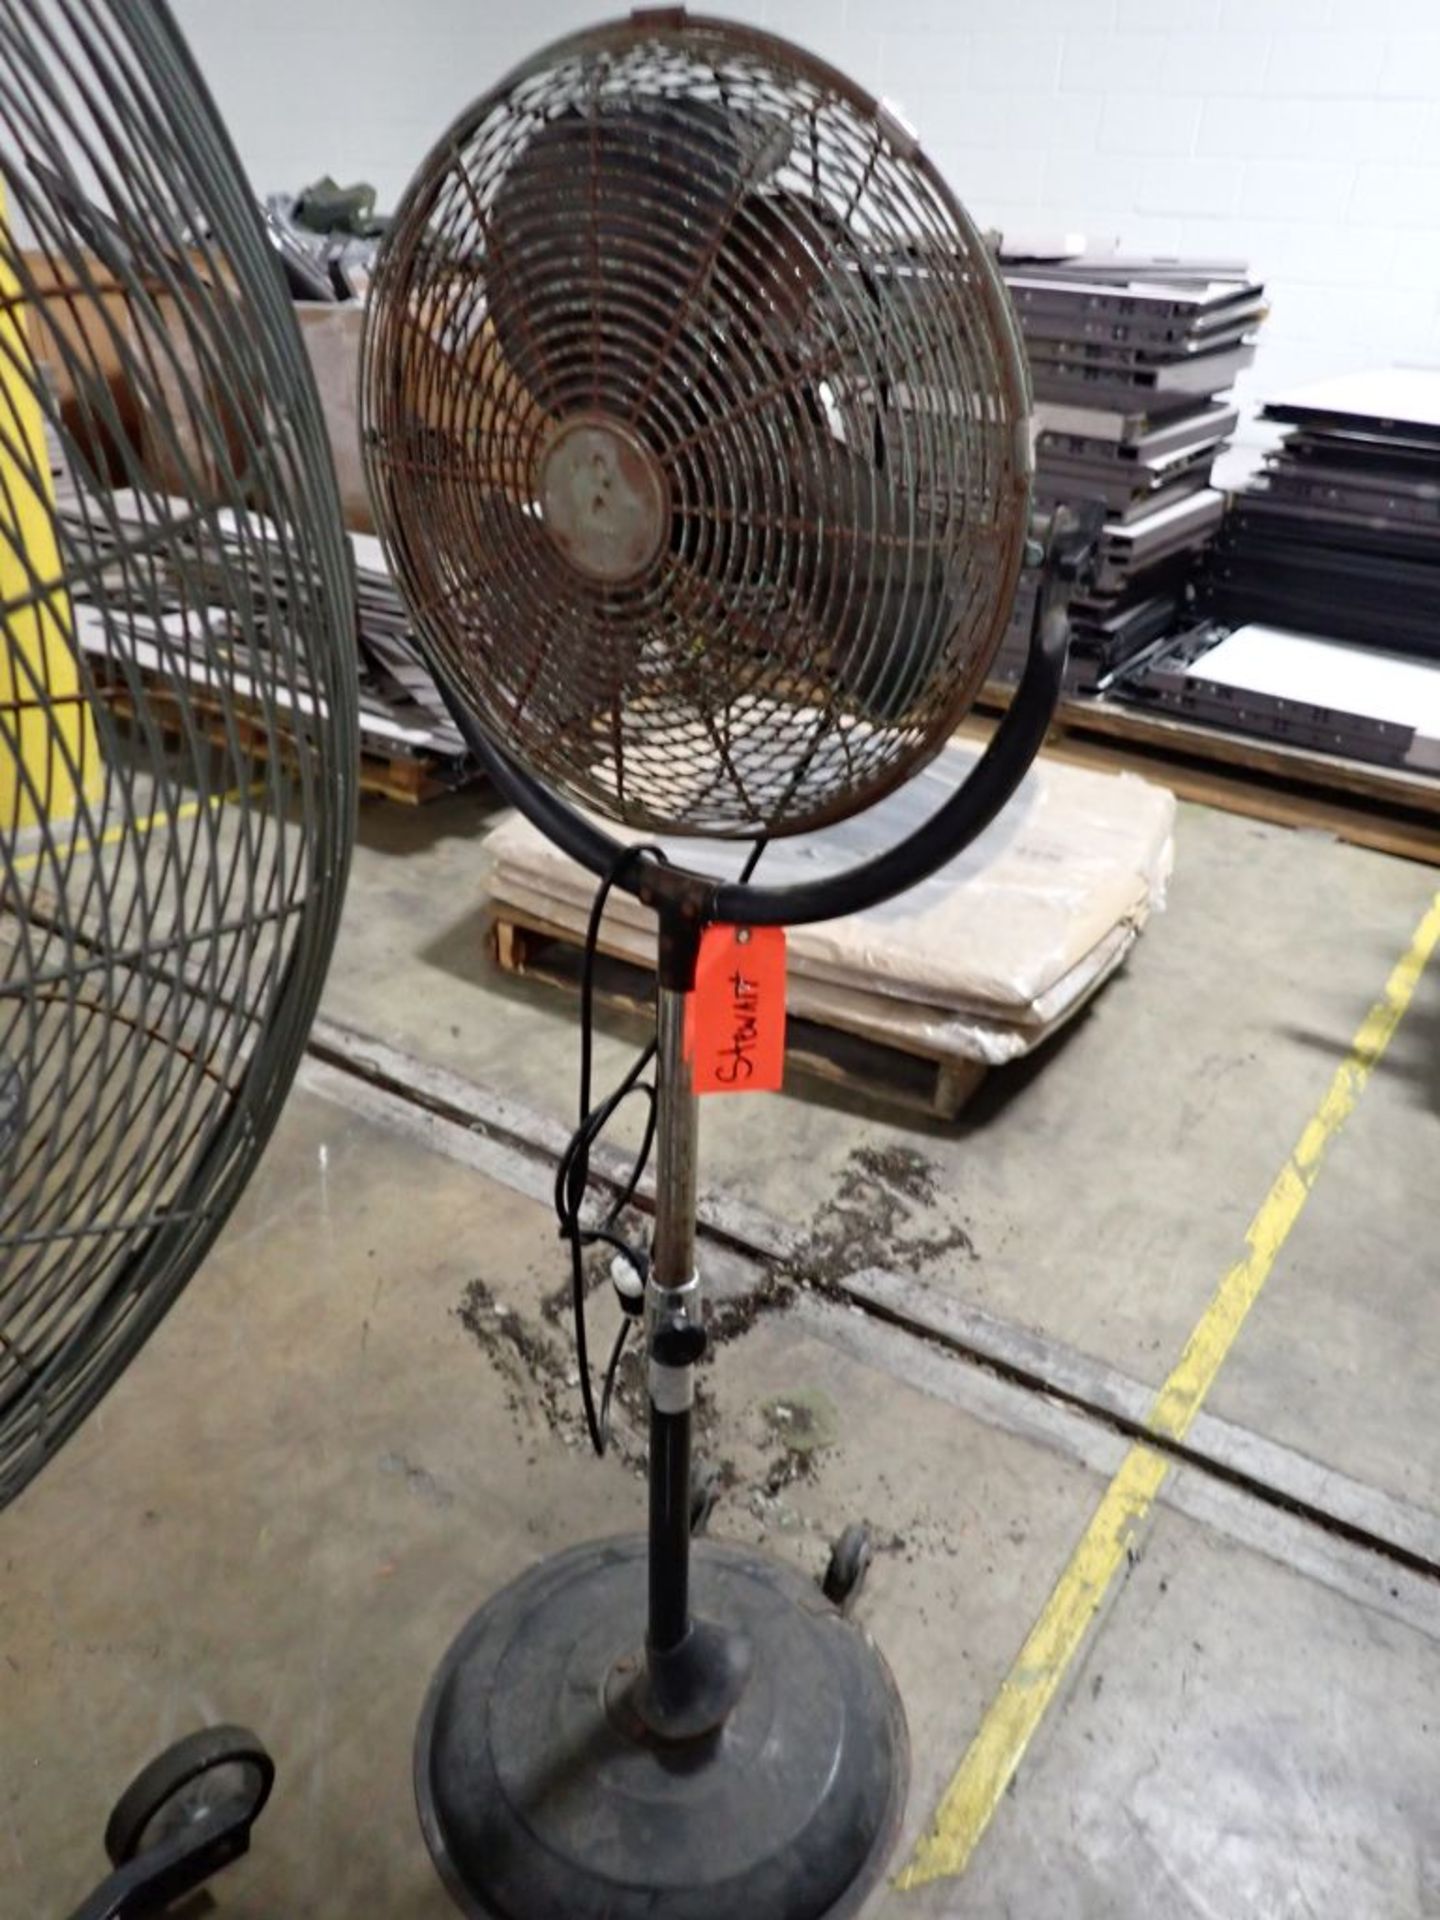 Lot of (3) Fans | Tag: 241667 | Limited Forklift Assistance Available - $10.00 Lot Loading Fee - Image 5 of 7